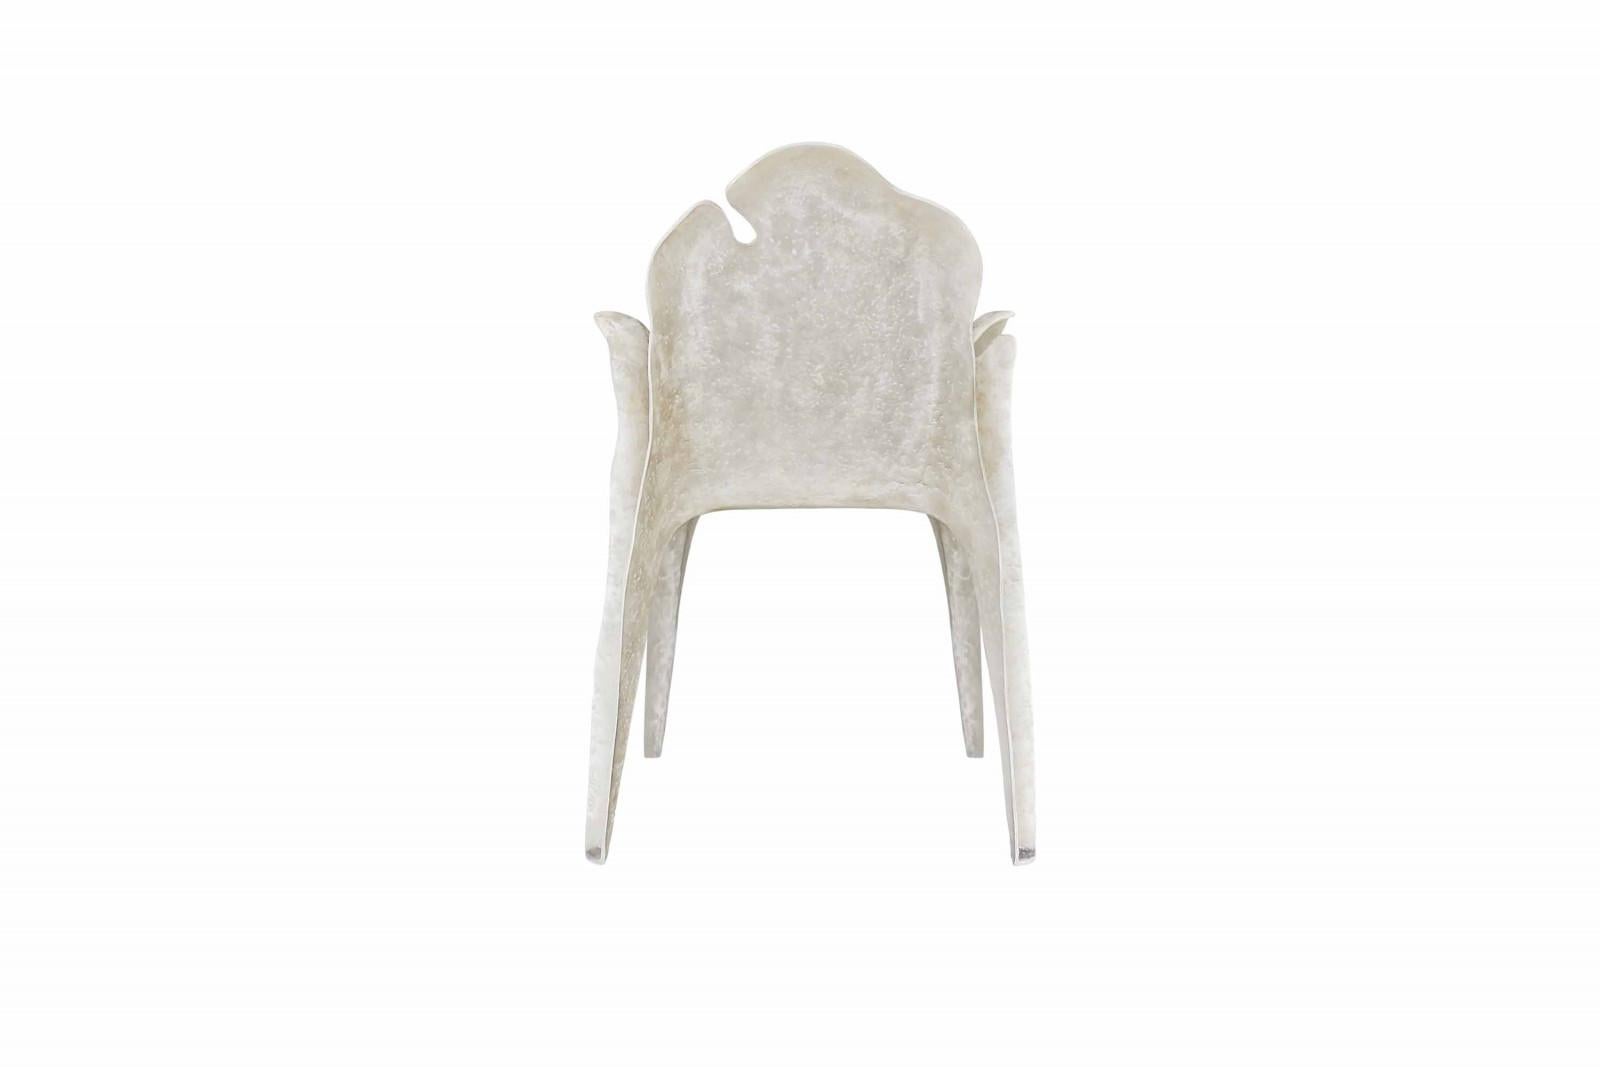 Contemporary outdoor/indoor chairs built with resin reinforced fiberglass. This highly resistant material is very durable and requires less maintenance than concrete. The chairs are then given an aged finish done by special artisans. Seat cushion